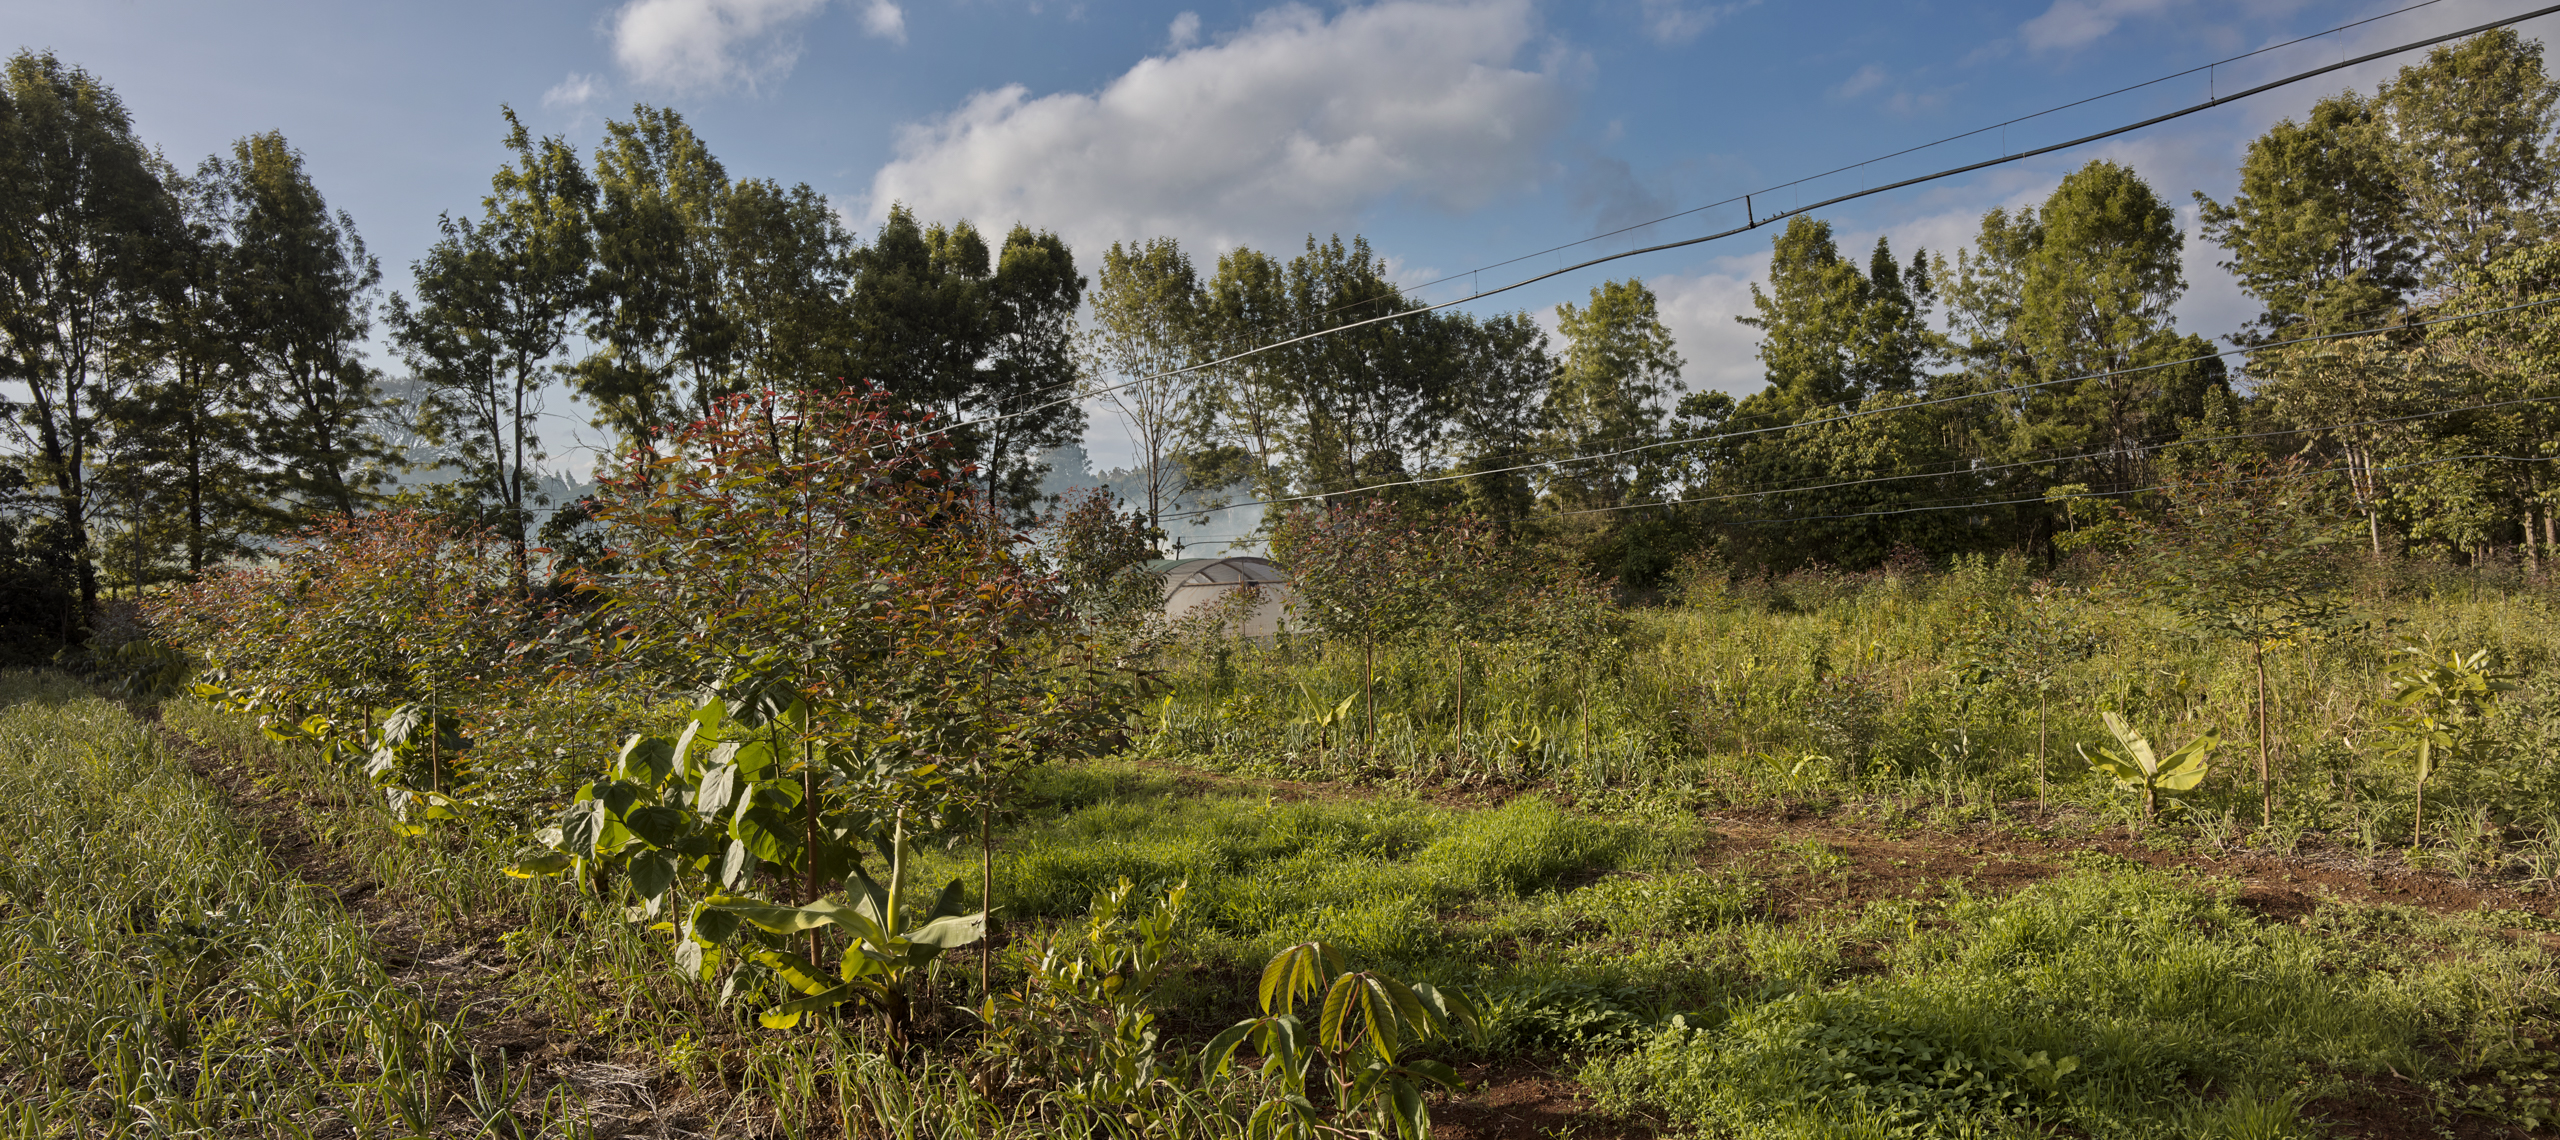 Syntropic agroforestry can be for smallholder farmers in kenya to start, scalling up large scale